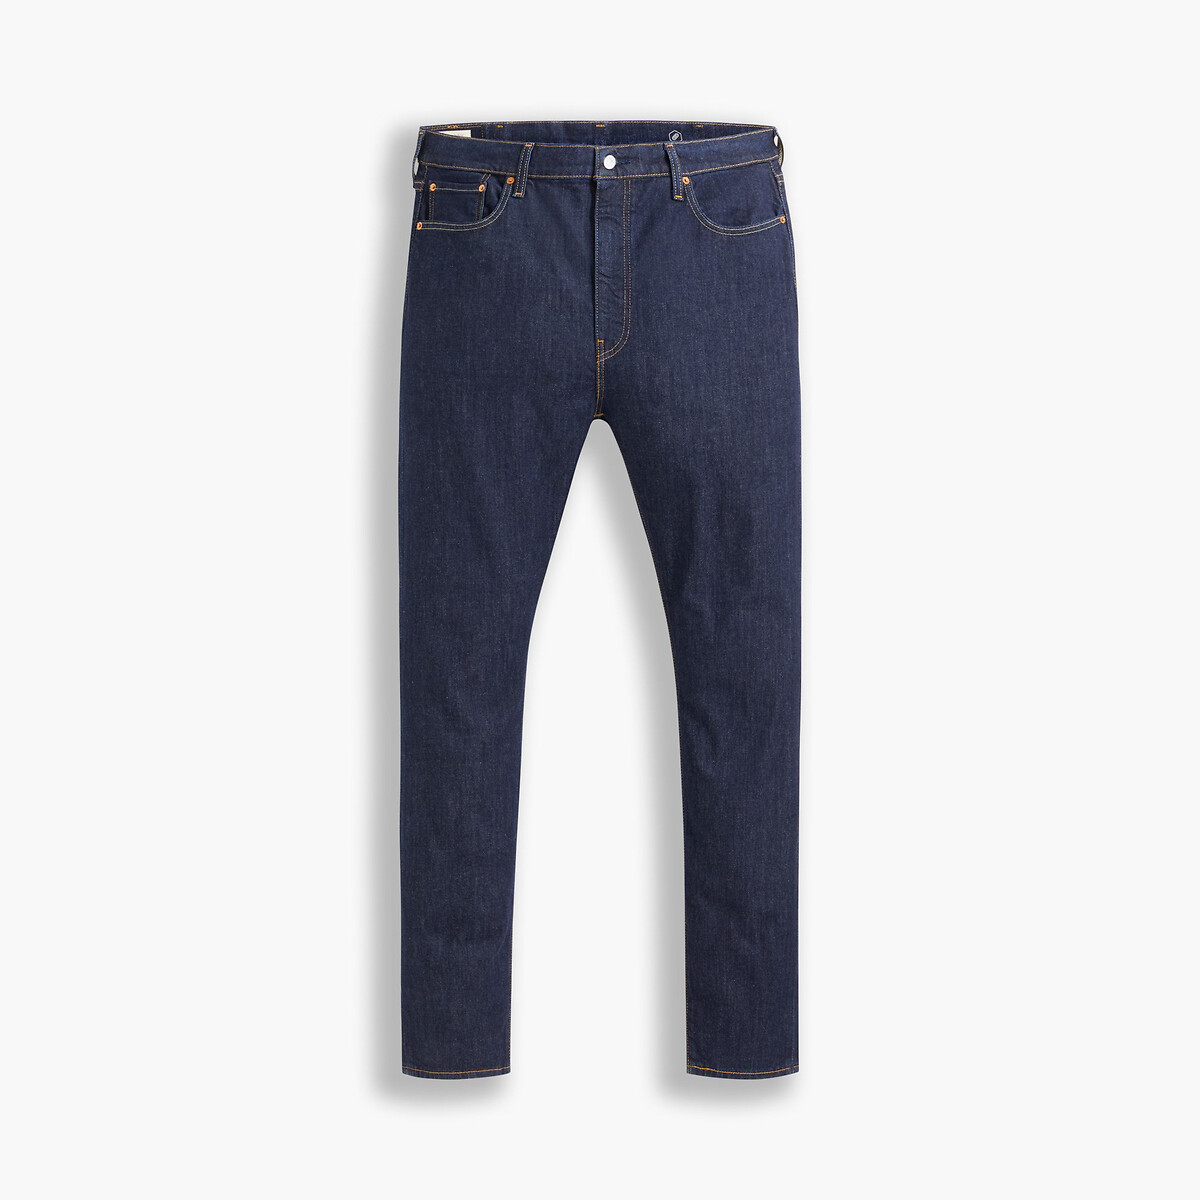 512 Tapered Jeans in Slim Fit and Mid Rise